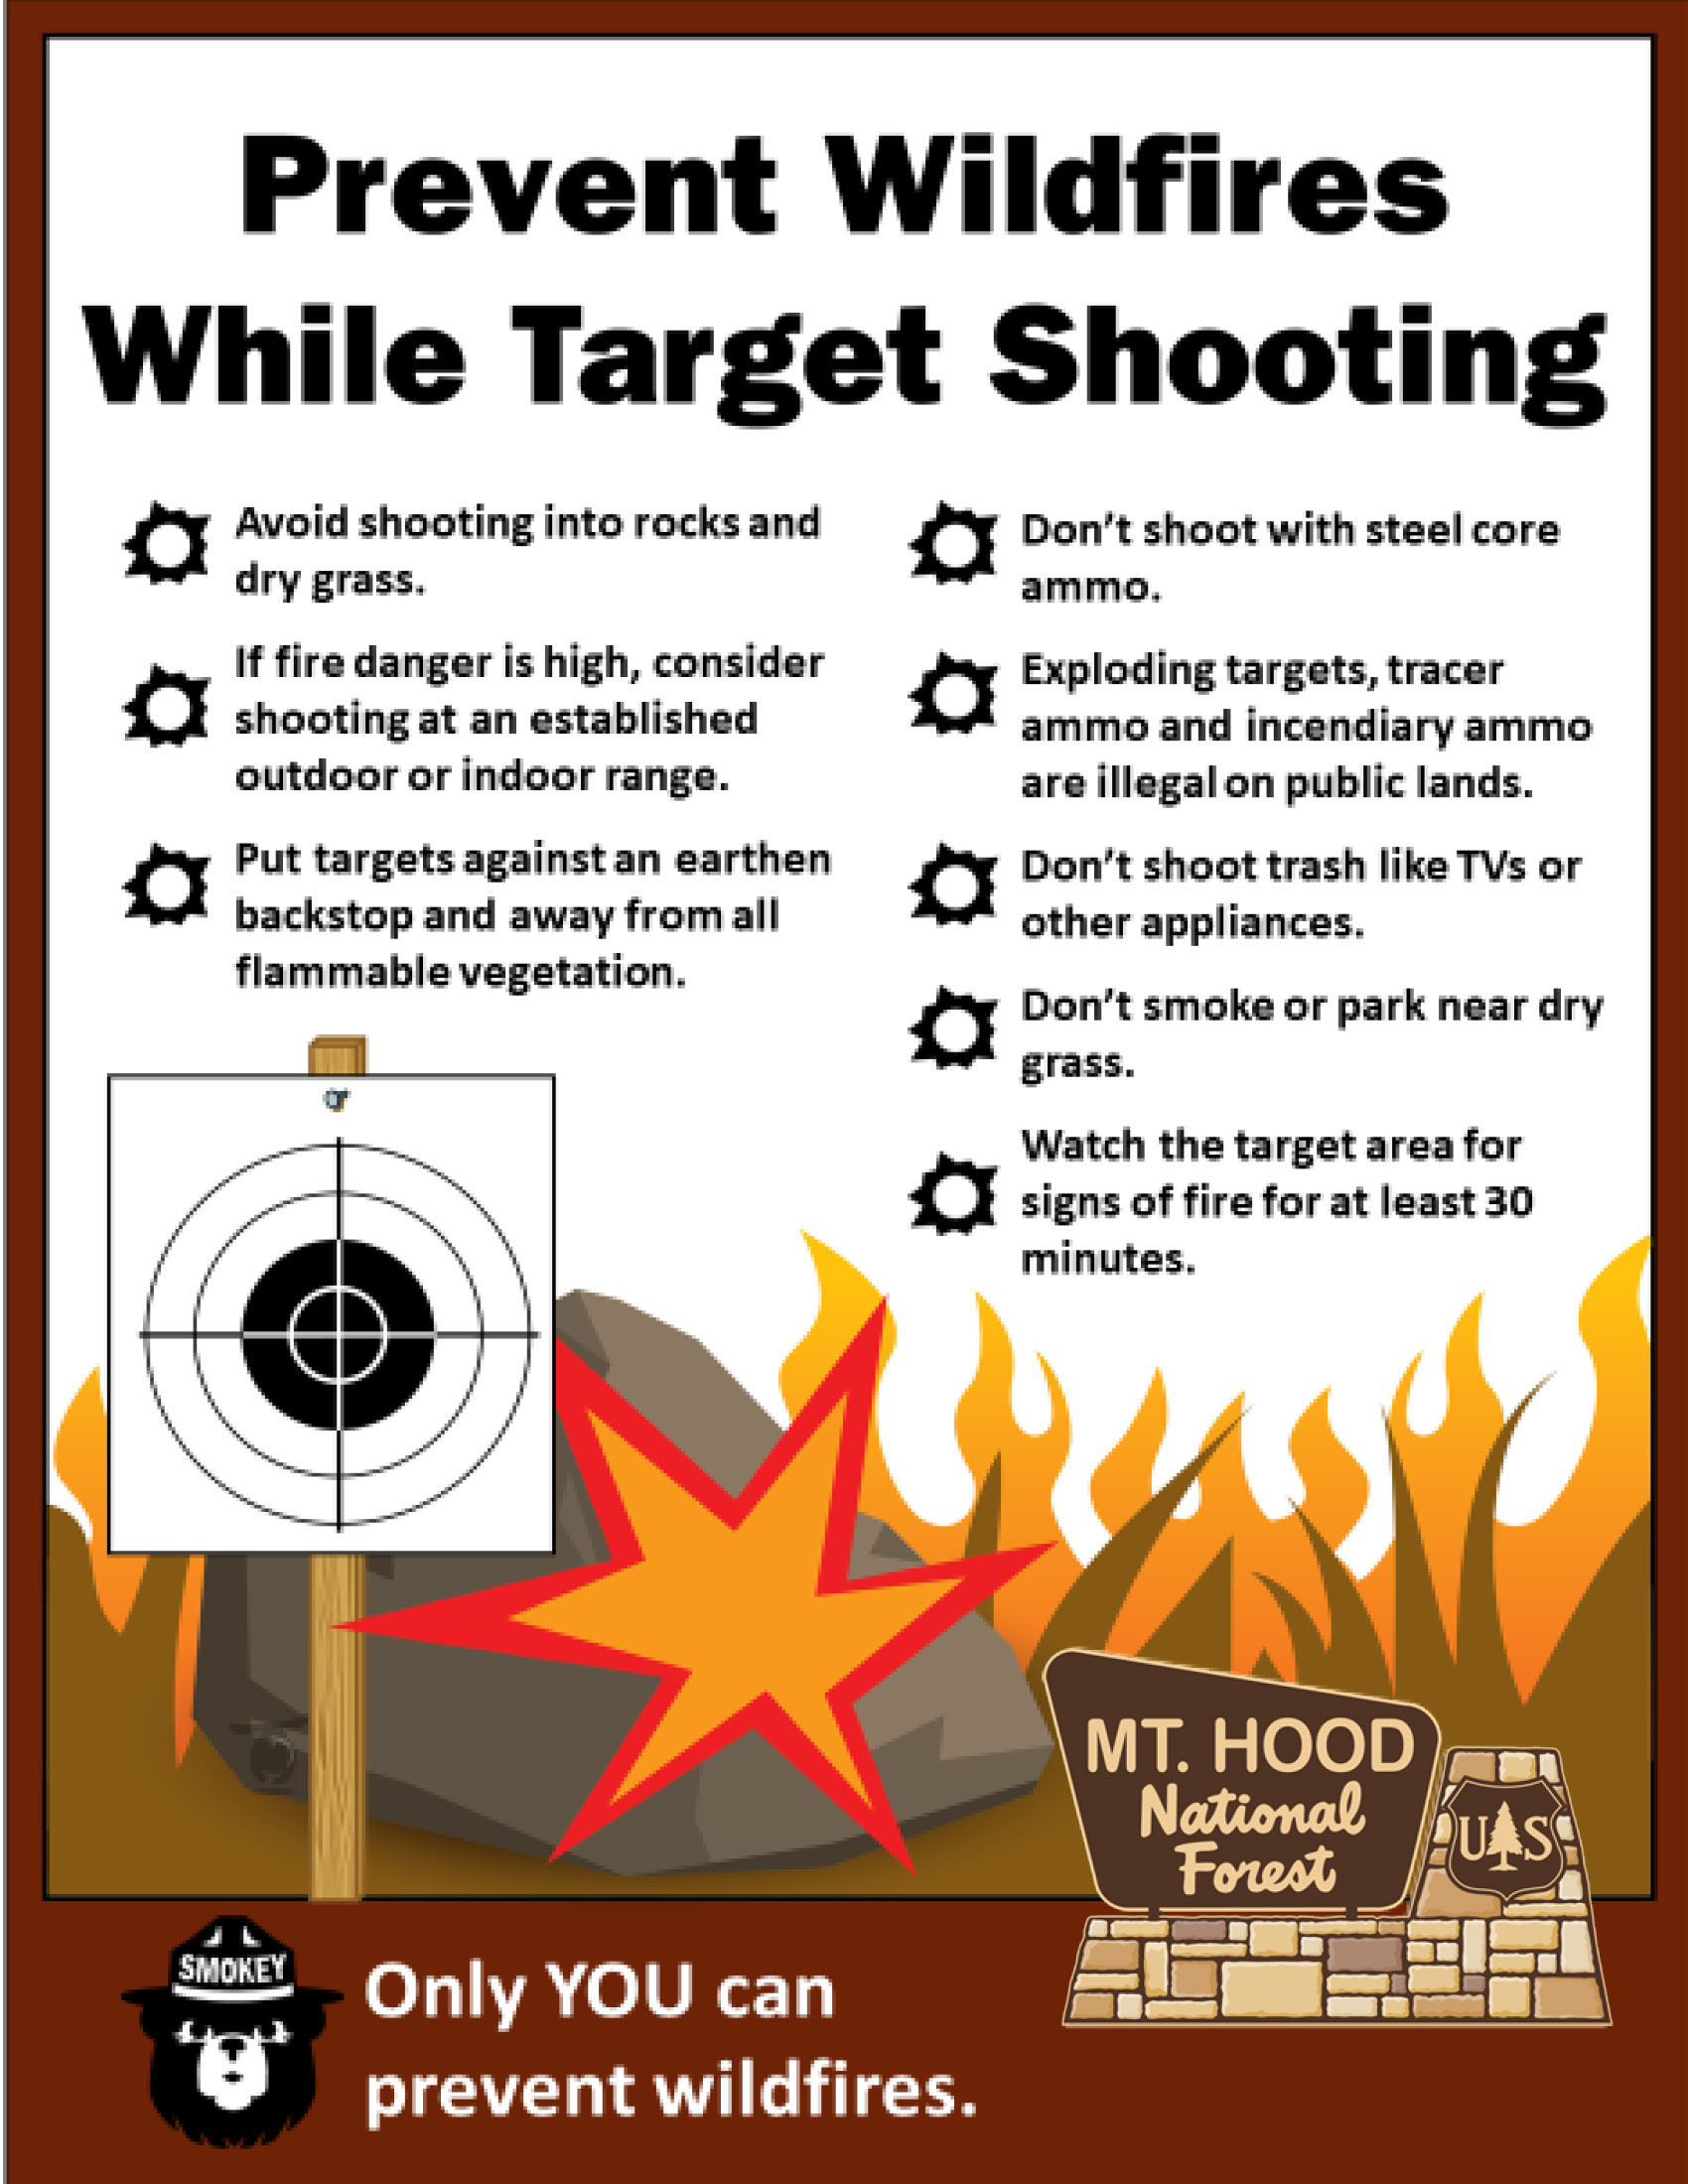 Fire safety and recreational shooting